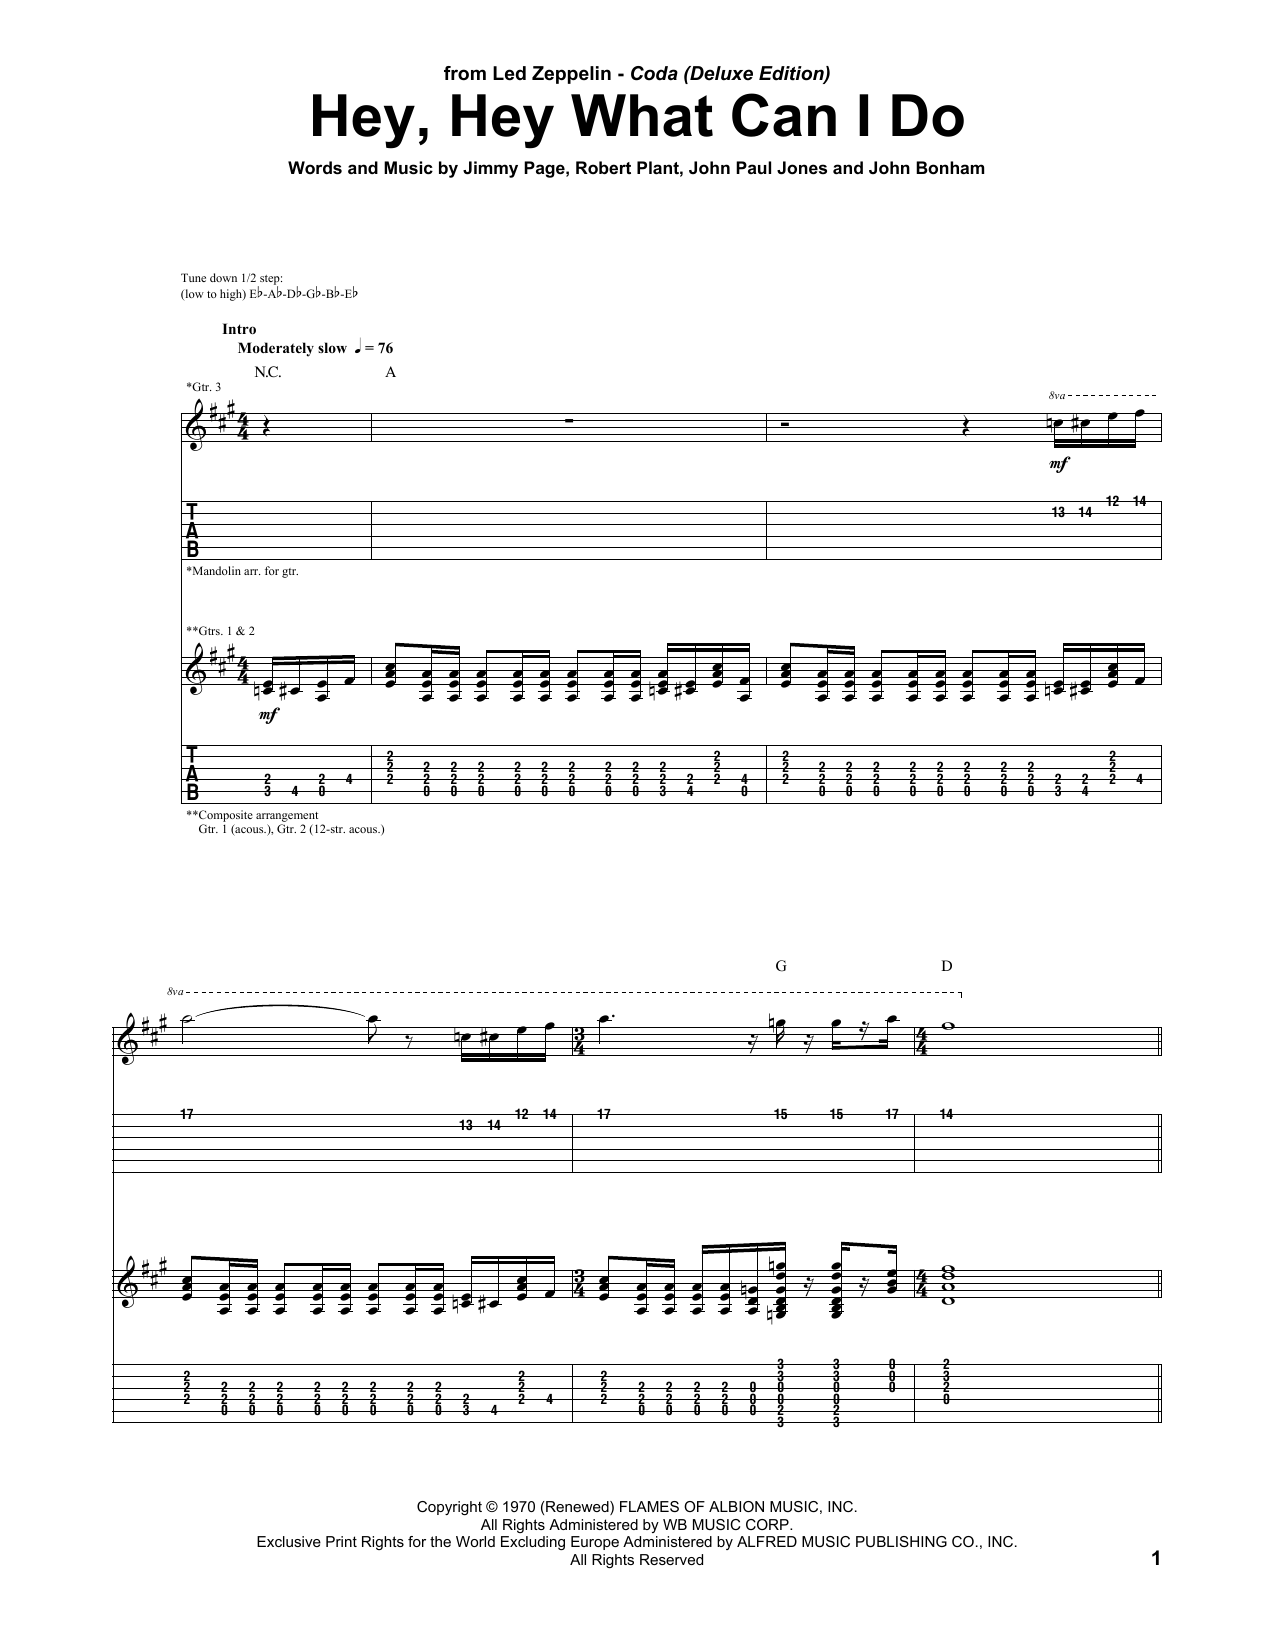 Download Led Zeppelin Hey, Hey What Can I Do Sheet Music